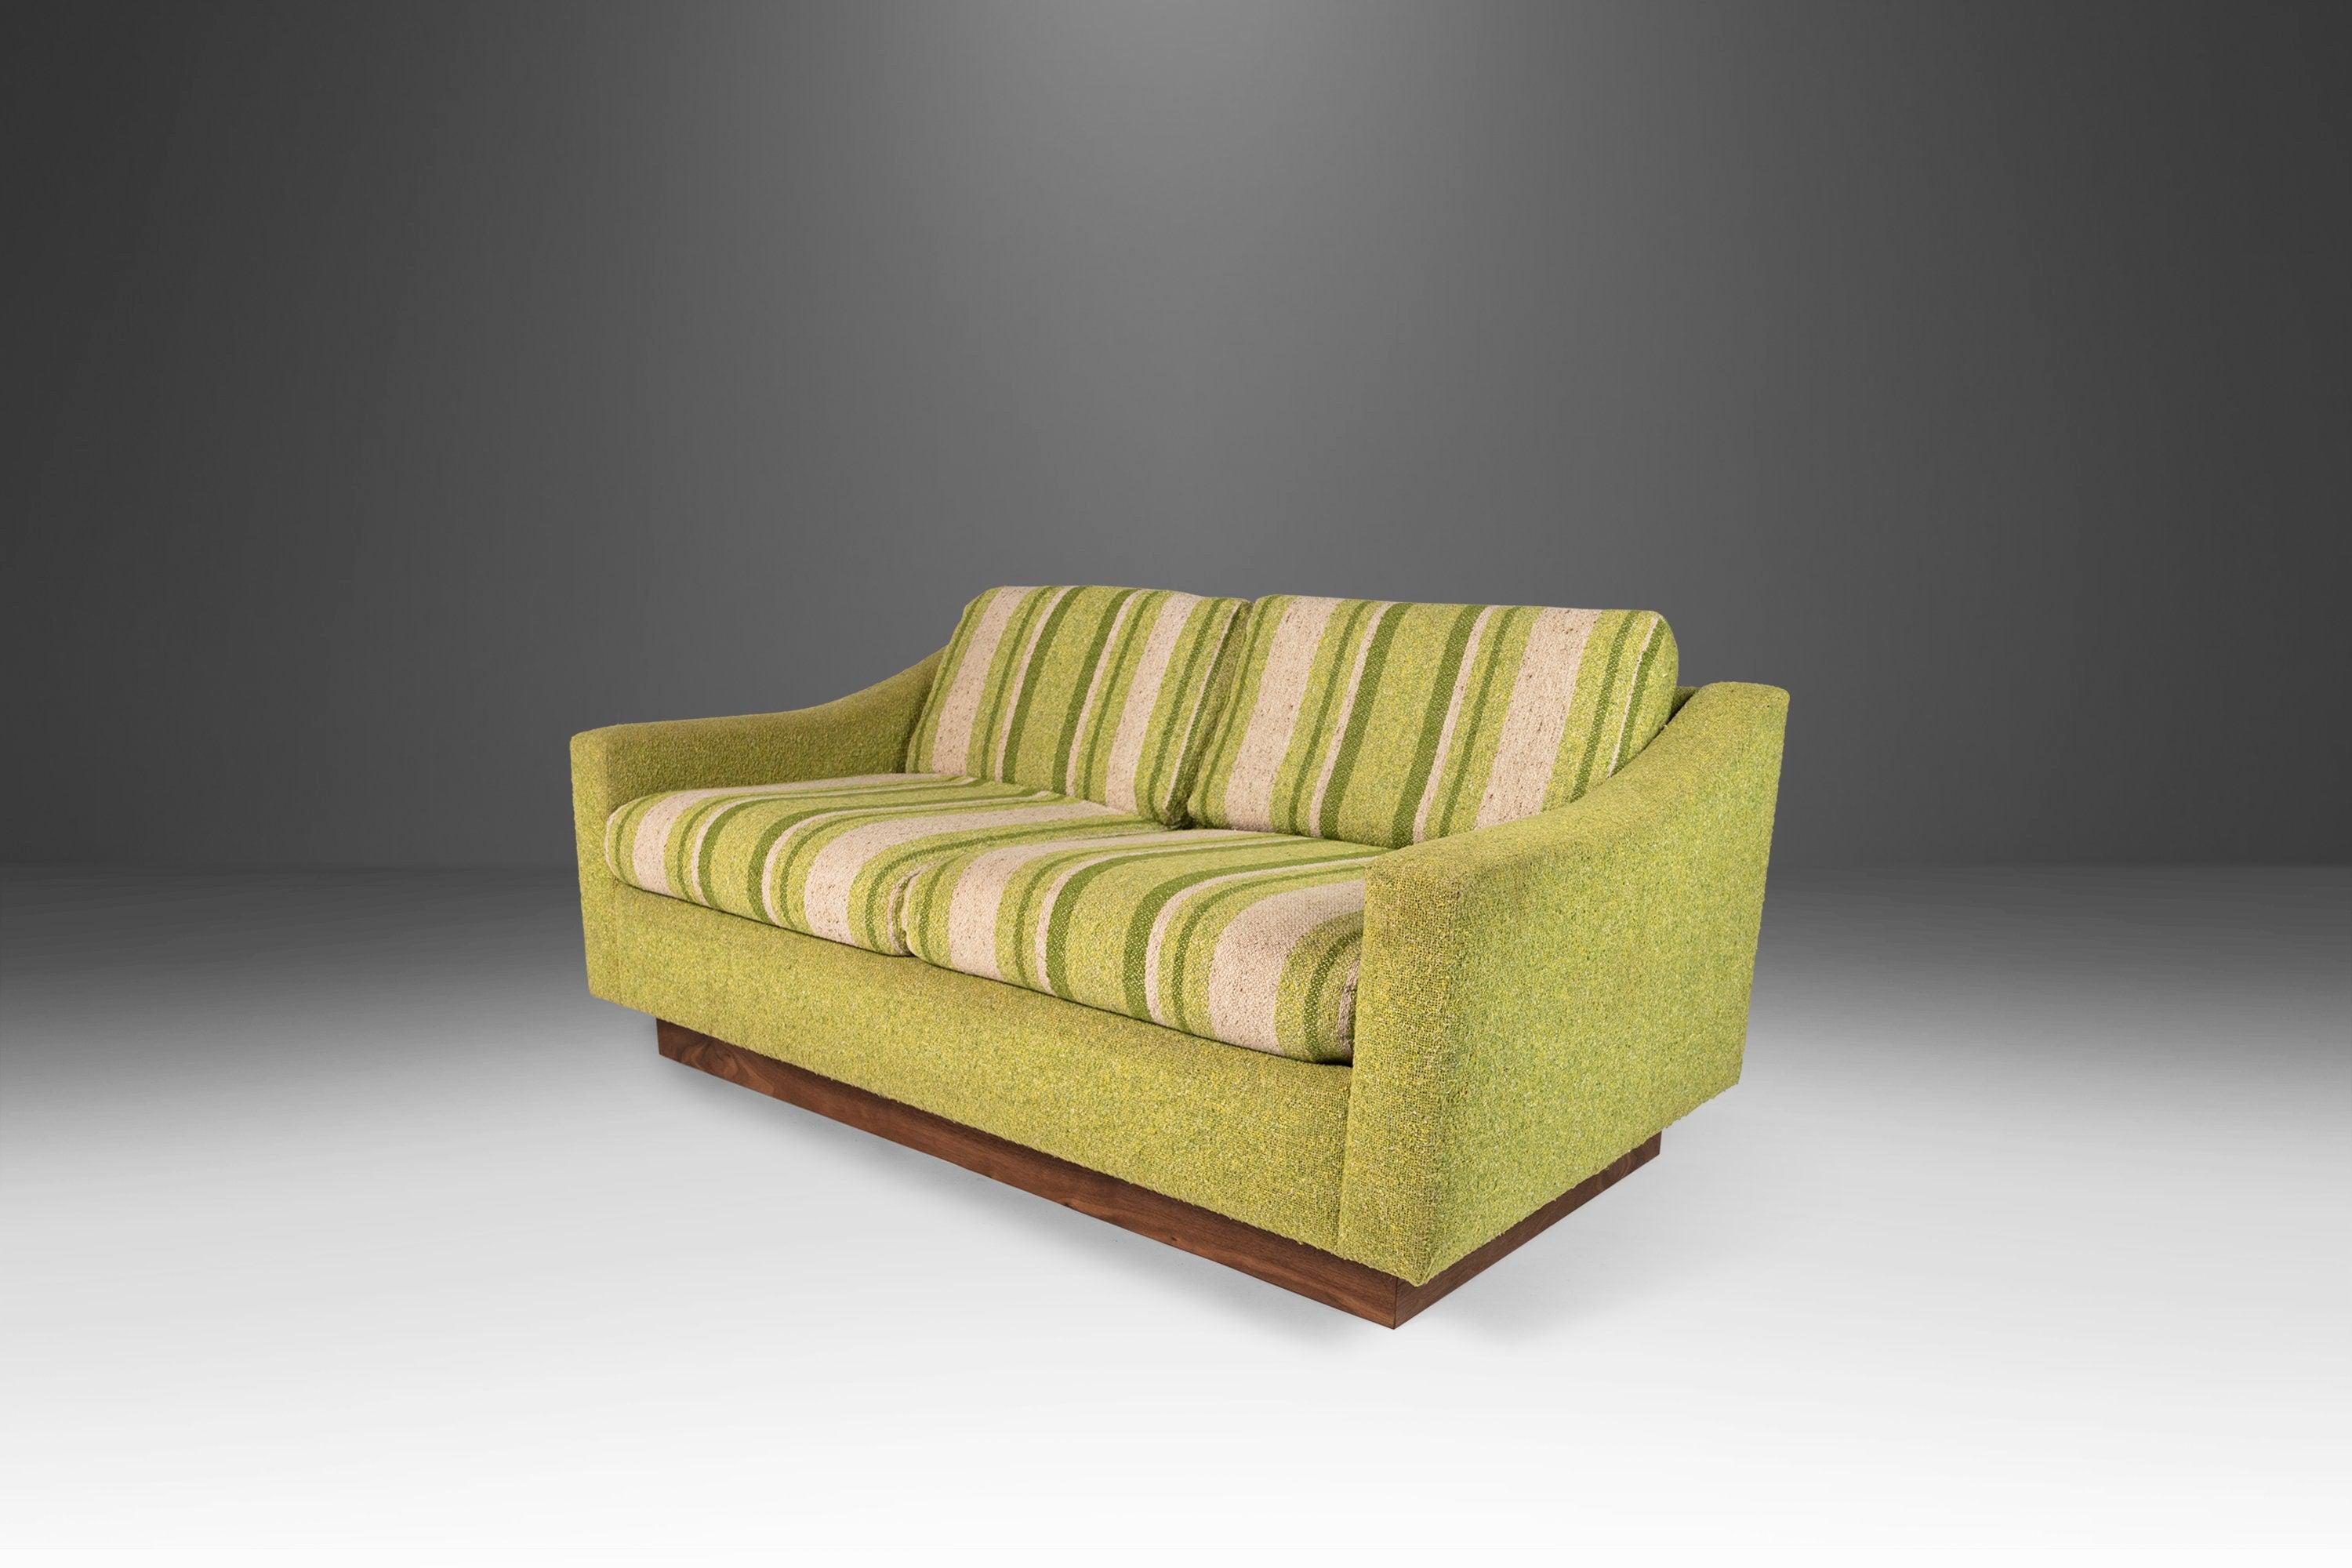 Equal parts comfort and retro style this eye-catching loveseat, attributed to Milo Baughman, is fresh out of the restoration shop and features a new plinth base made of solid black walnut. The original tweed upholstery, in a fabulous lime green with